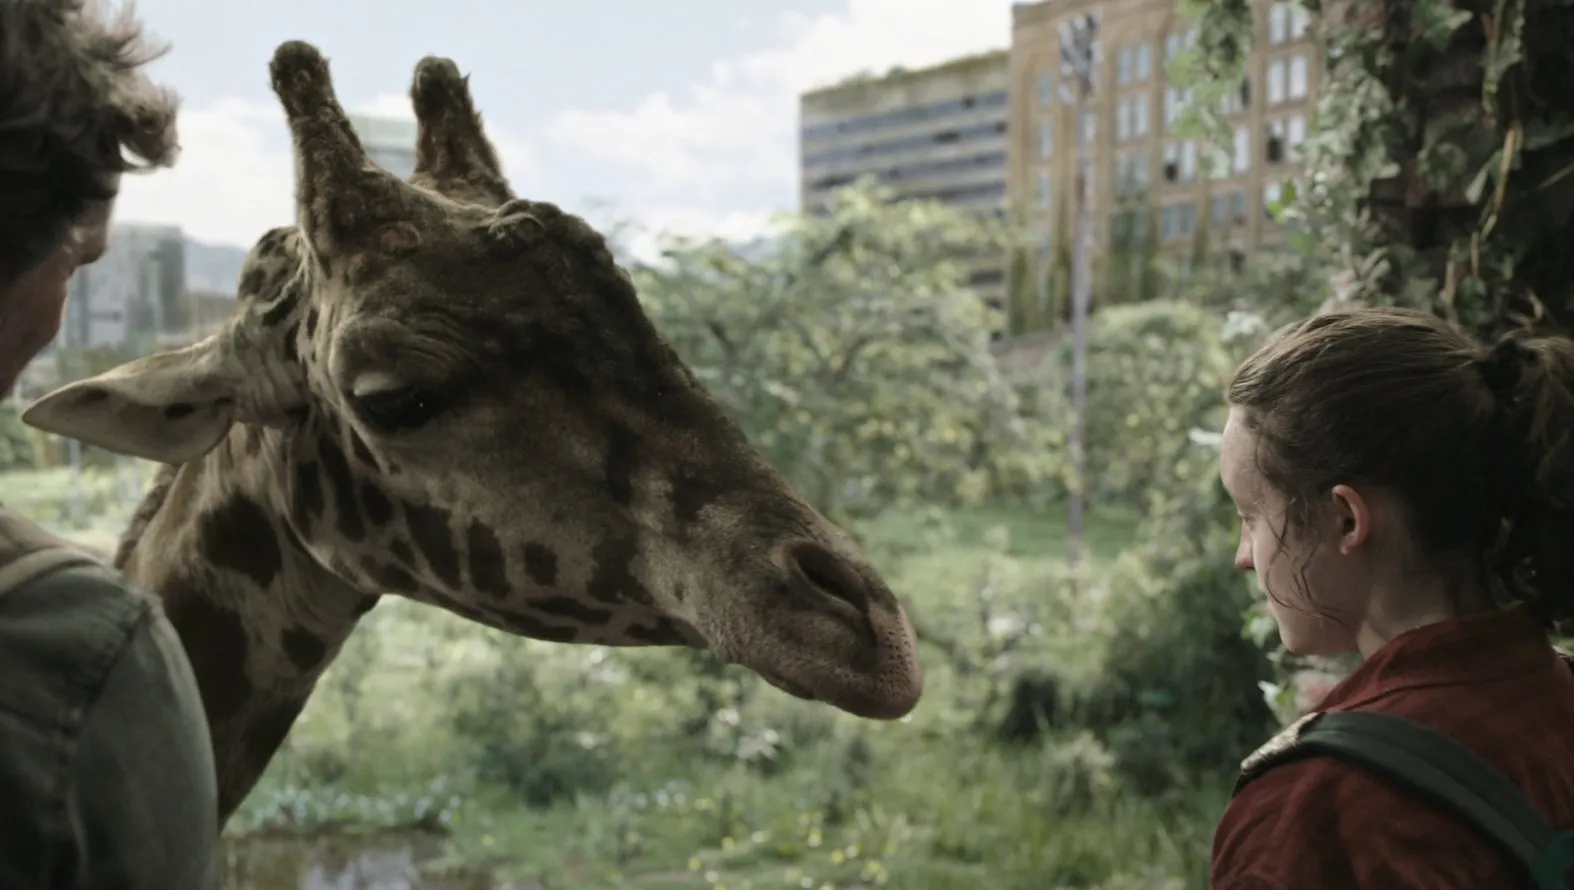 Ellie William (Bella Ramsey) face to face with a giraffe